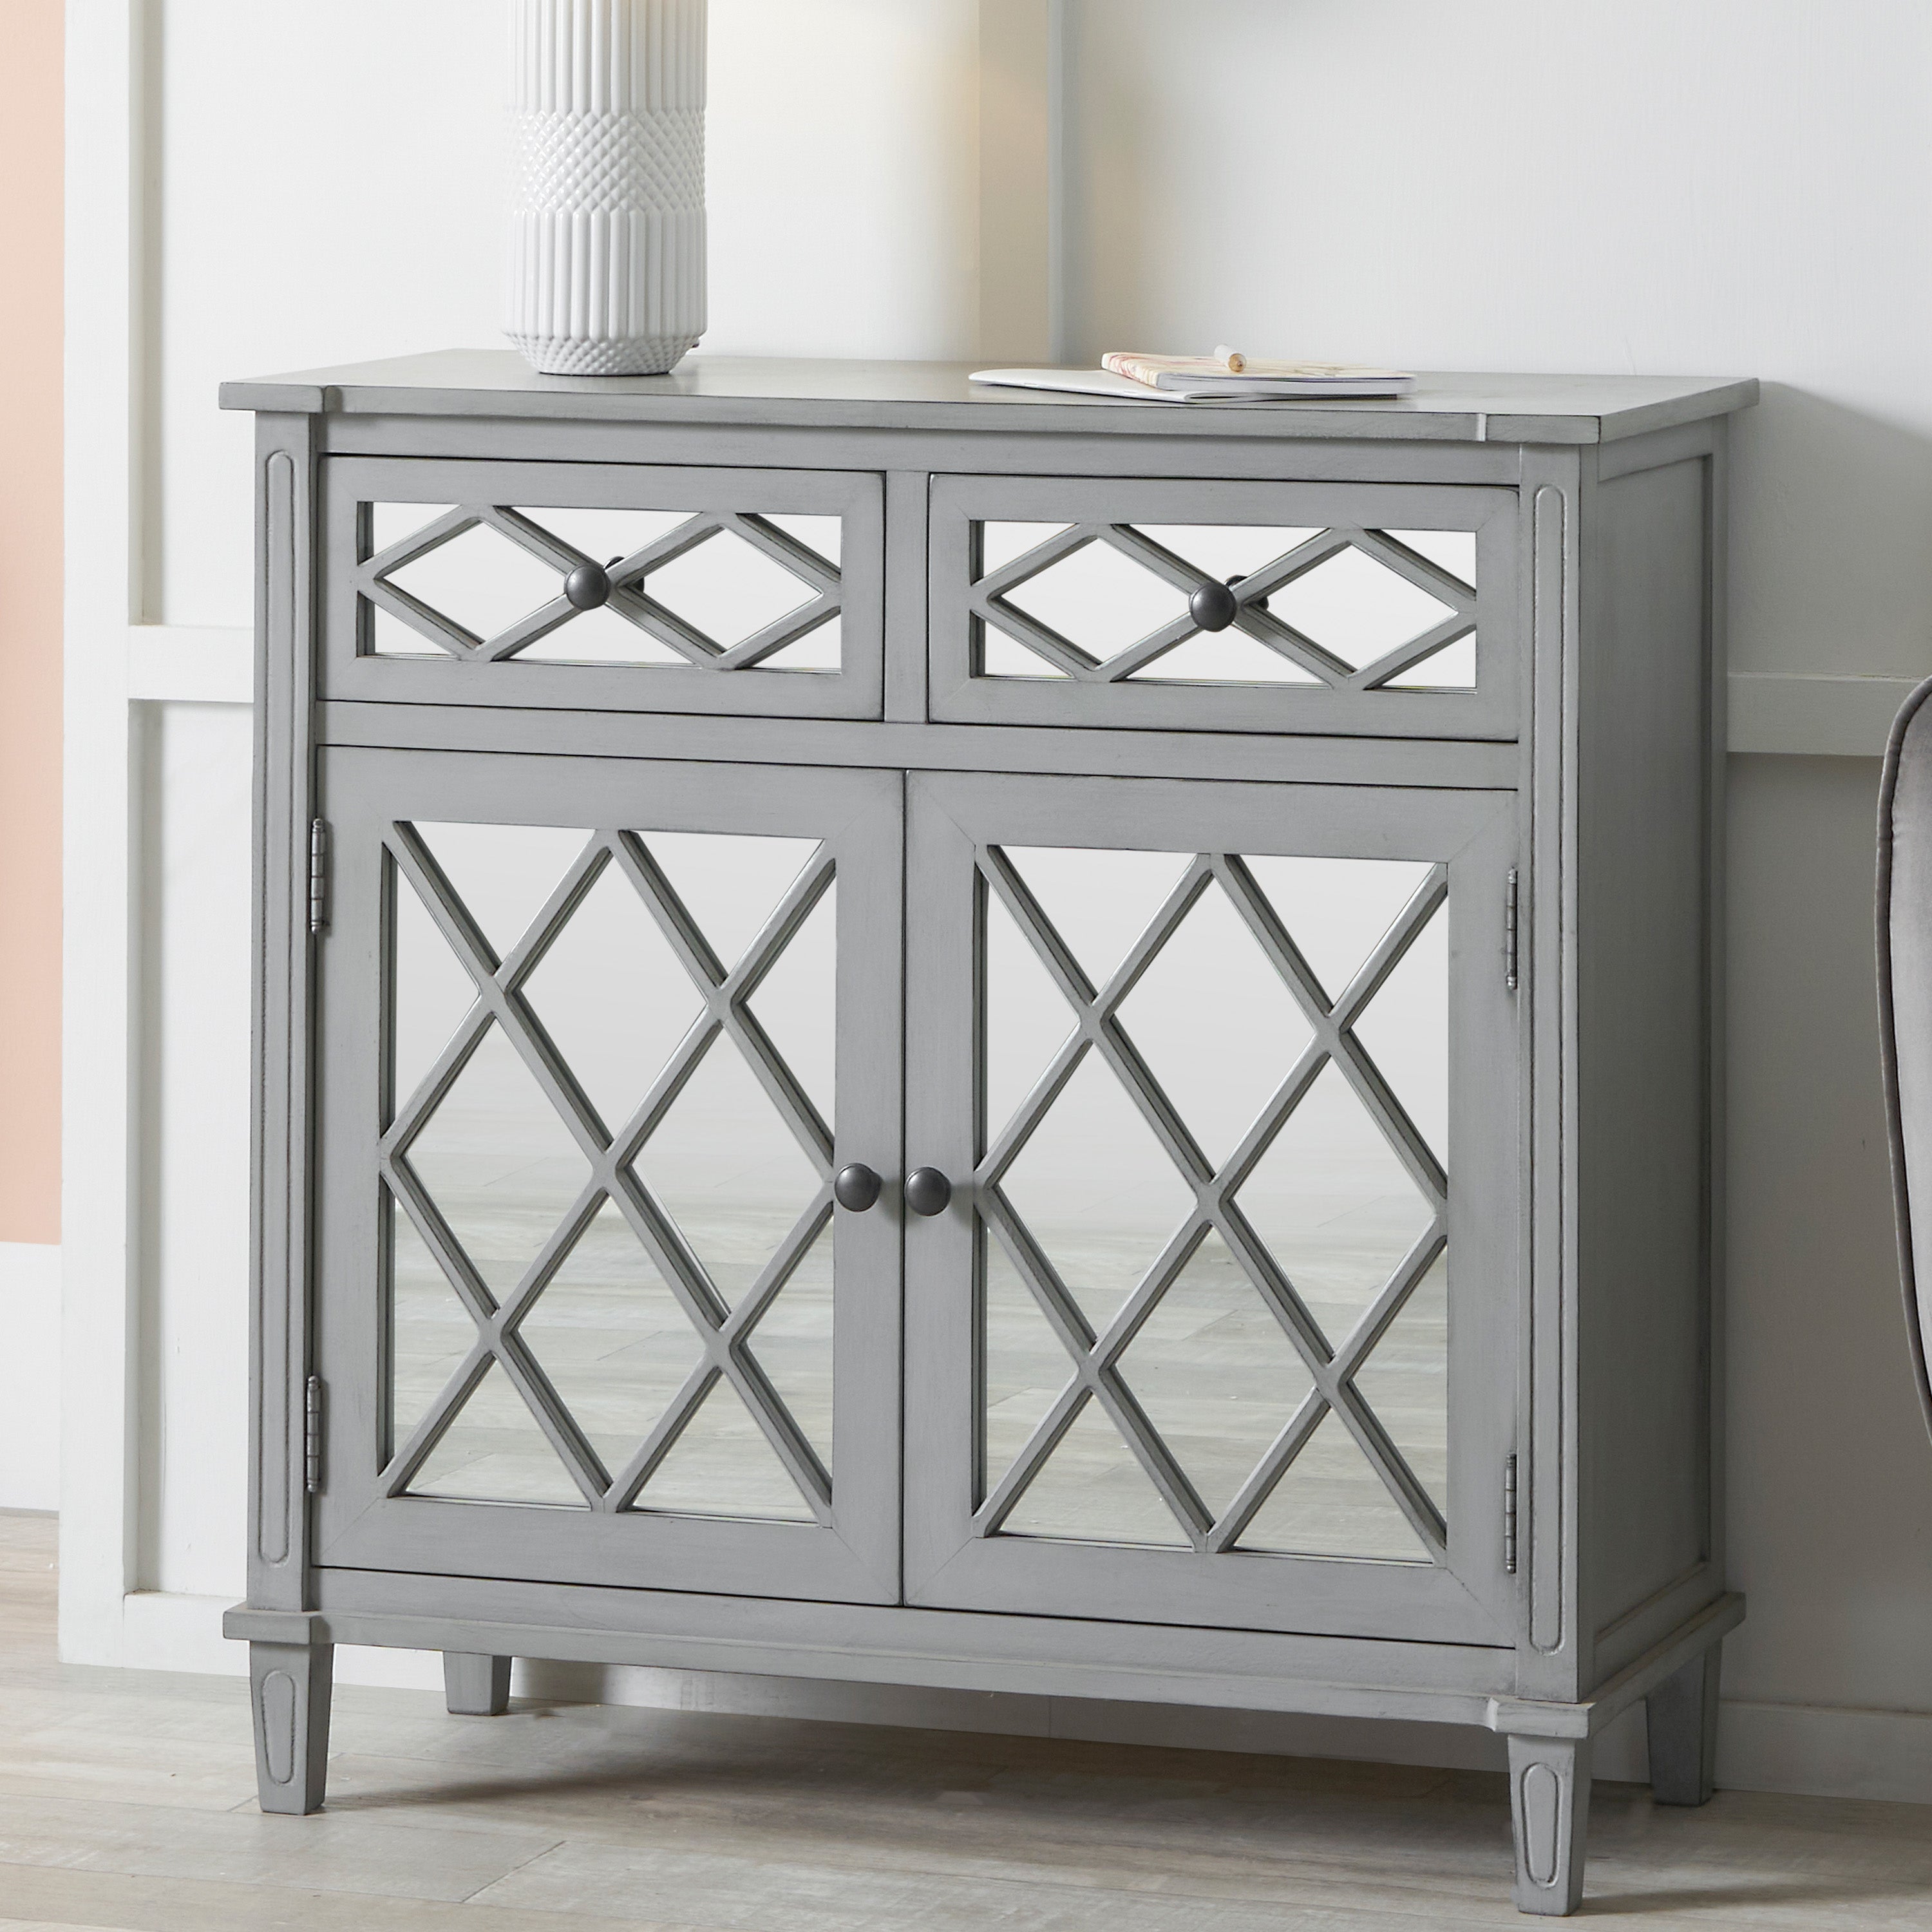 Photos - Dresser / Chests of Drawers Pacific Puglia Sideboard, Painted Pine Grey 